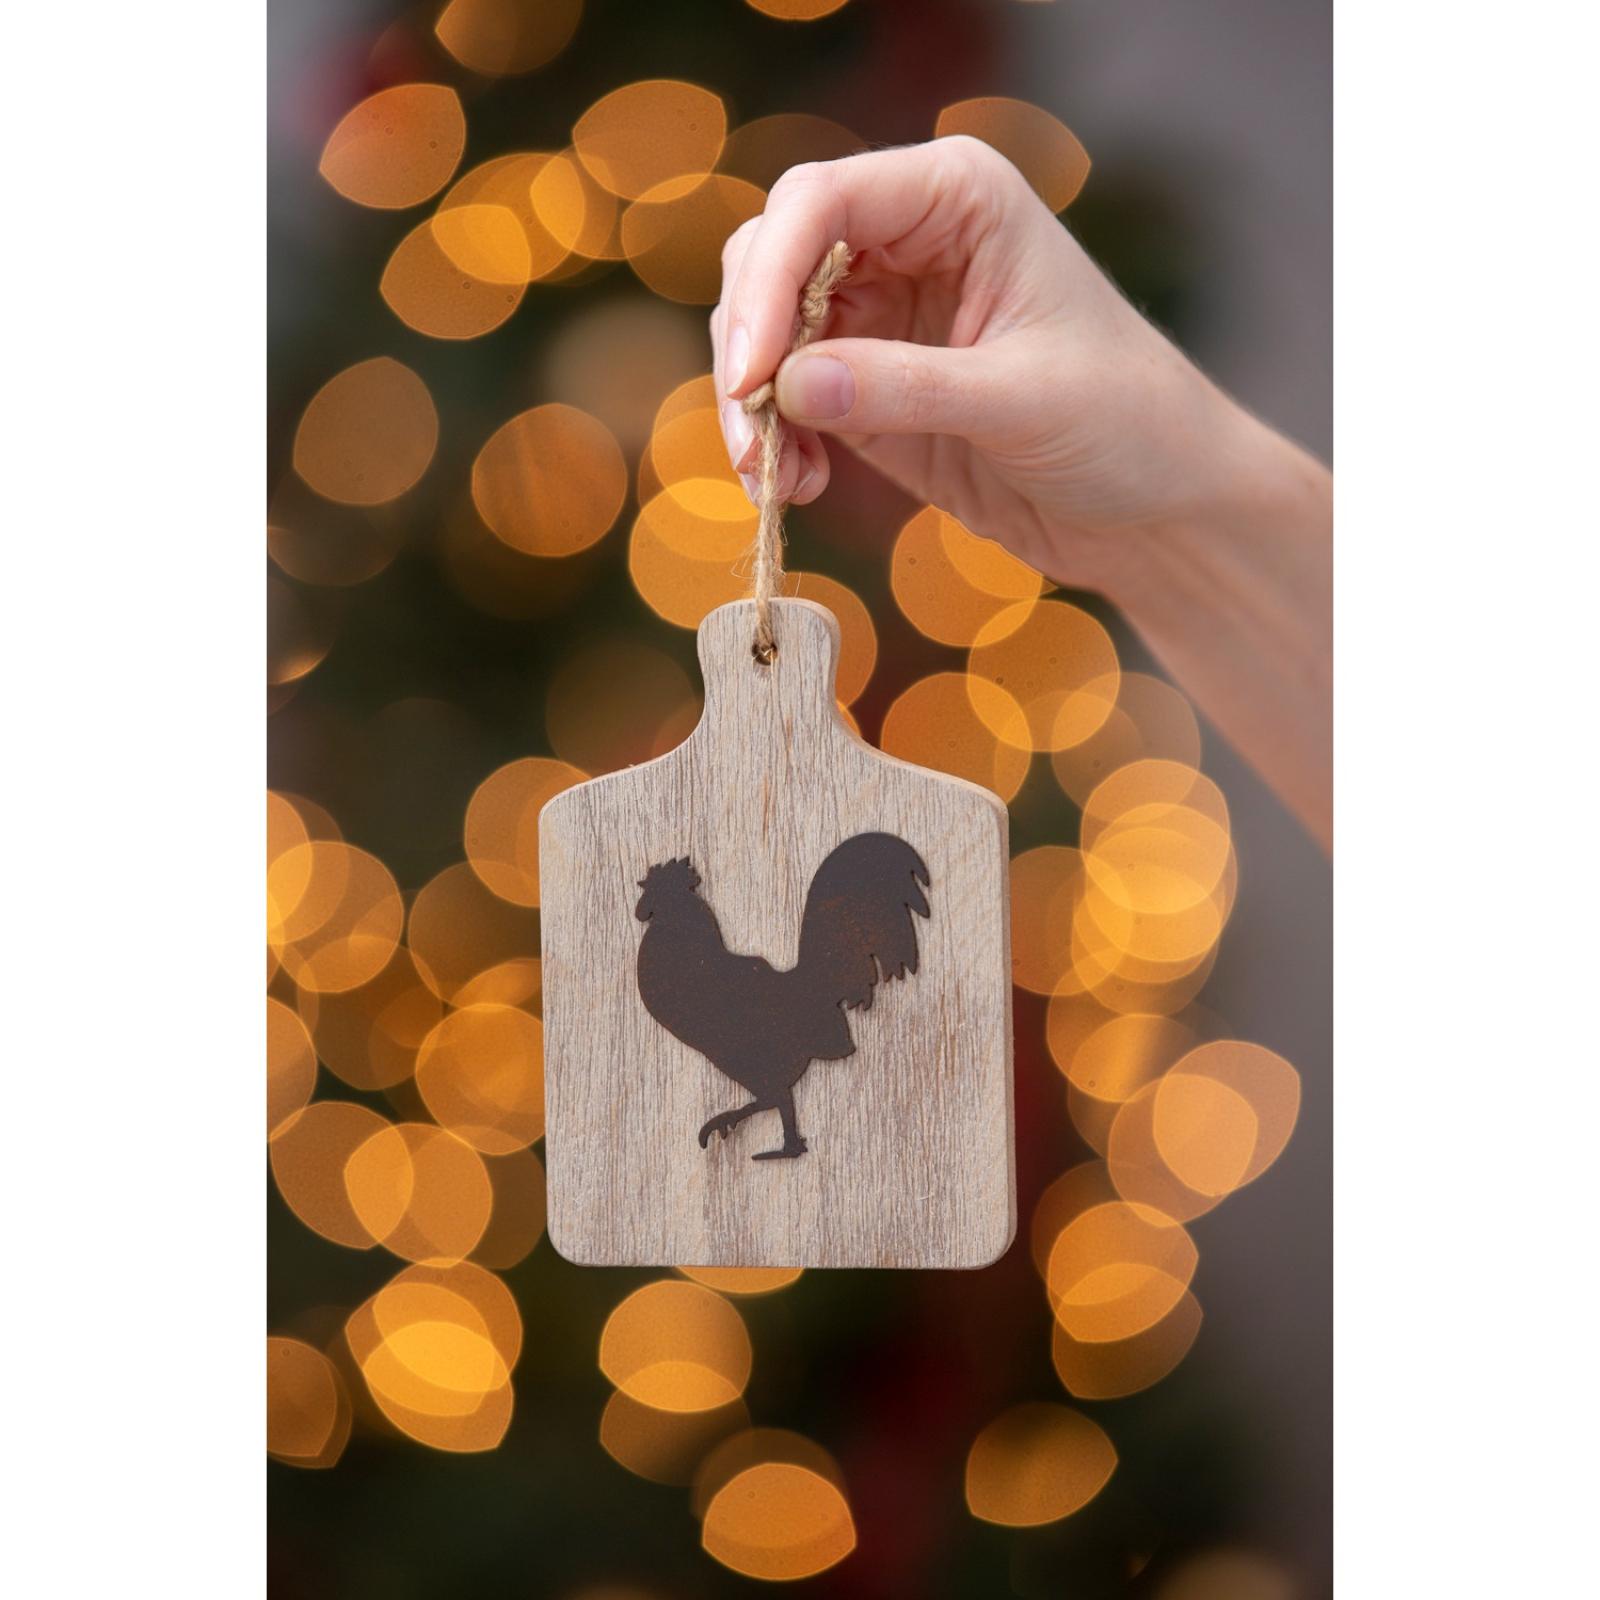 Evergreen Enterprises Assorted Cutting Board Ornaments Rooster